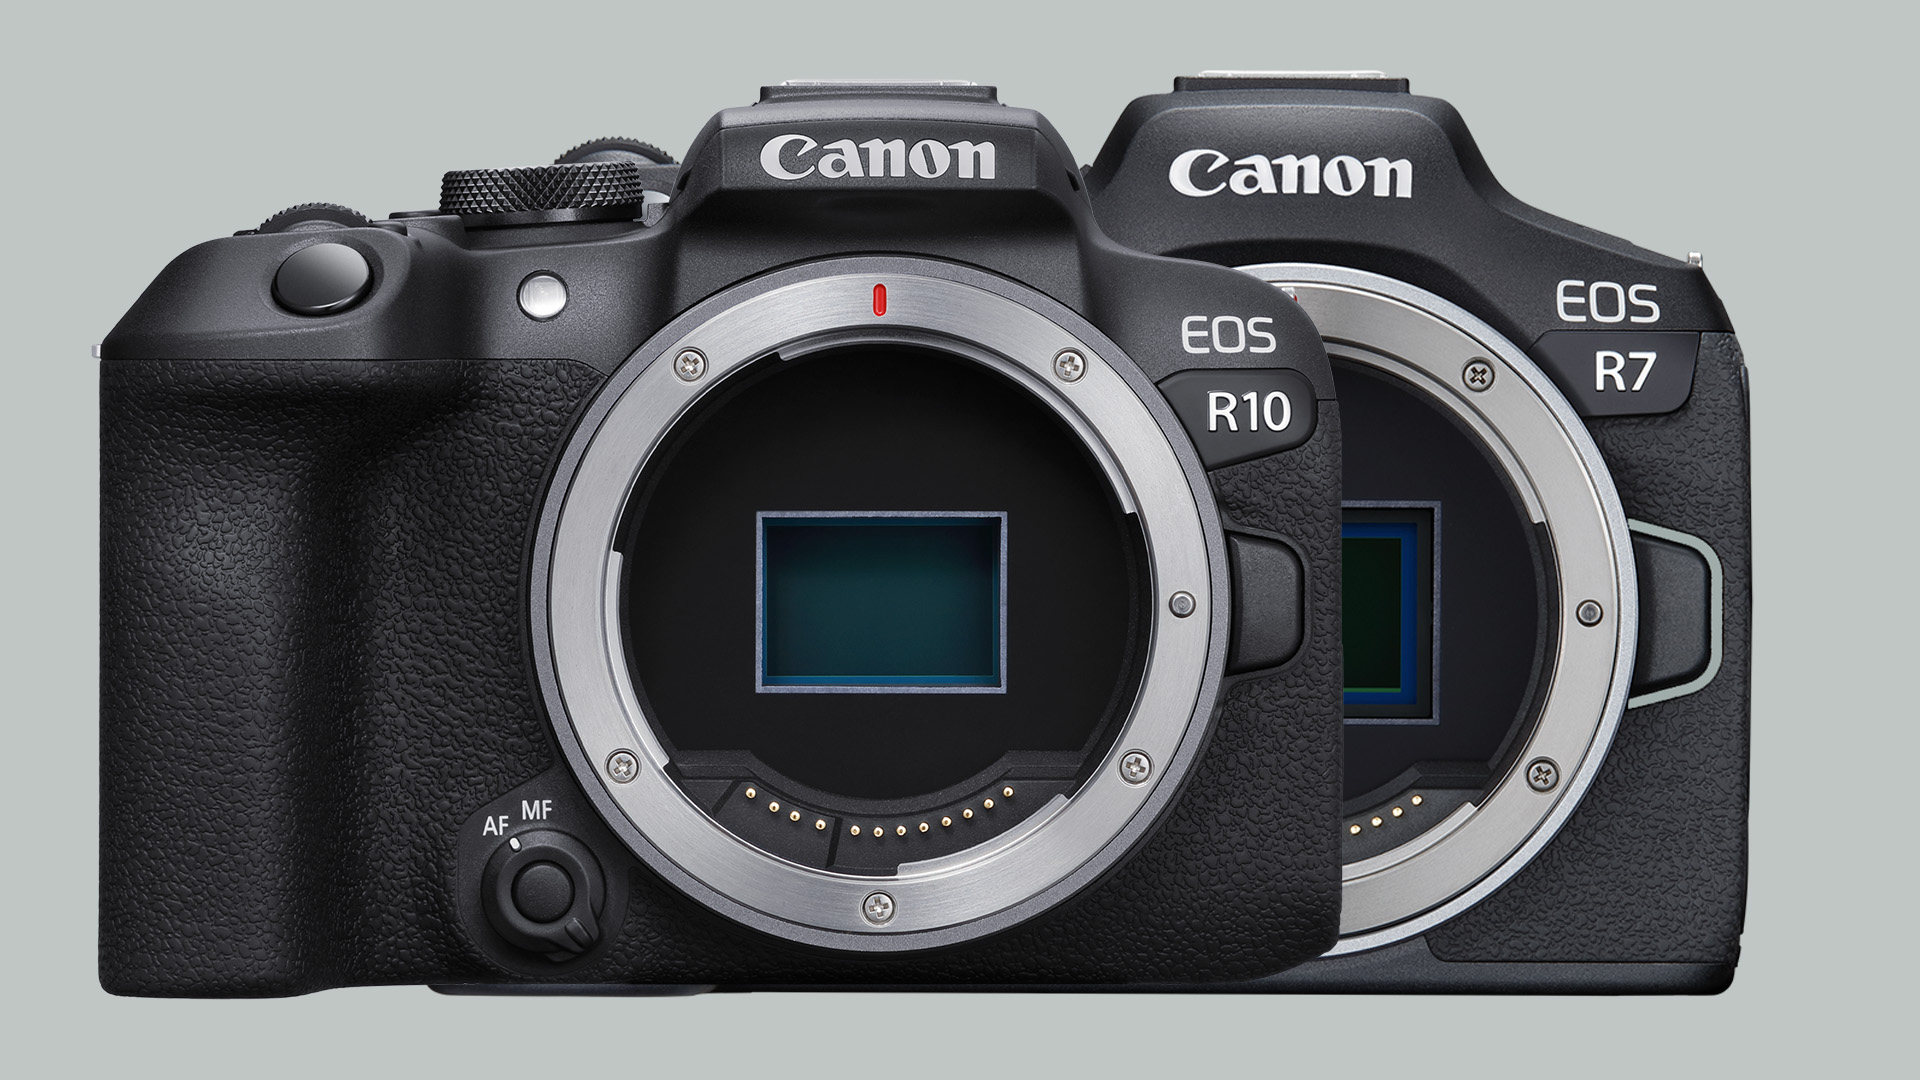 Canon EOS R10 vs Canon EOS R7: Major Differences to Know About